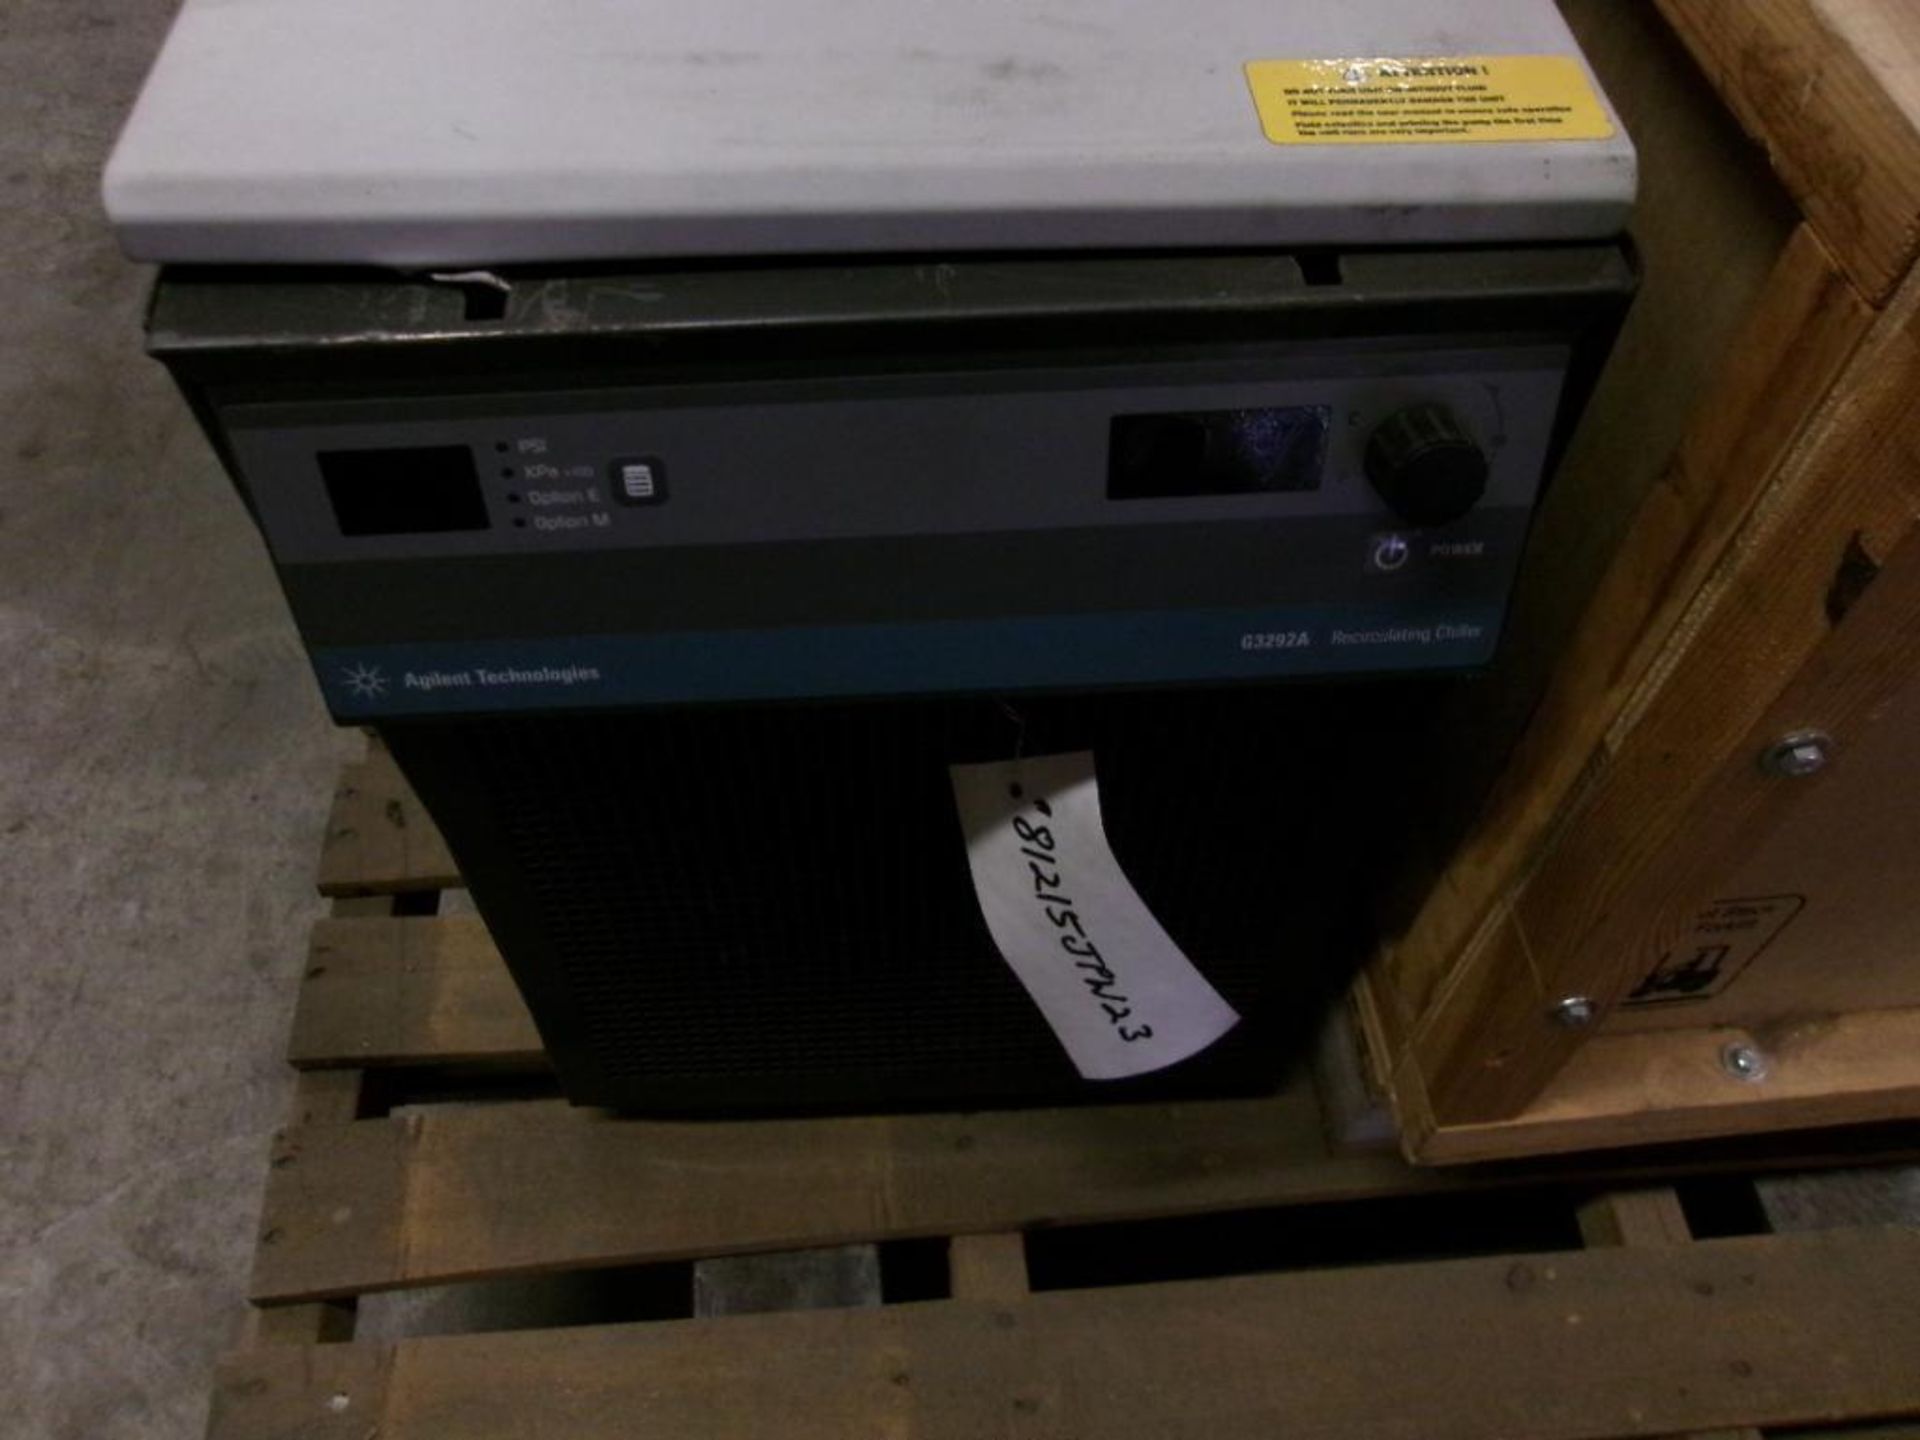 Agilent Assy. Mono Cary 600I Spare, Agilent G3292A Water Chiller (New) - Image 4 of 10